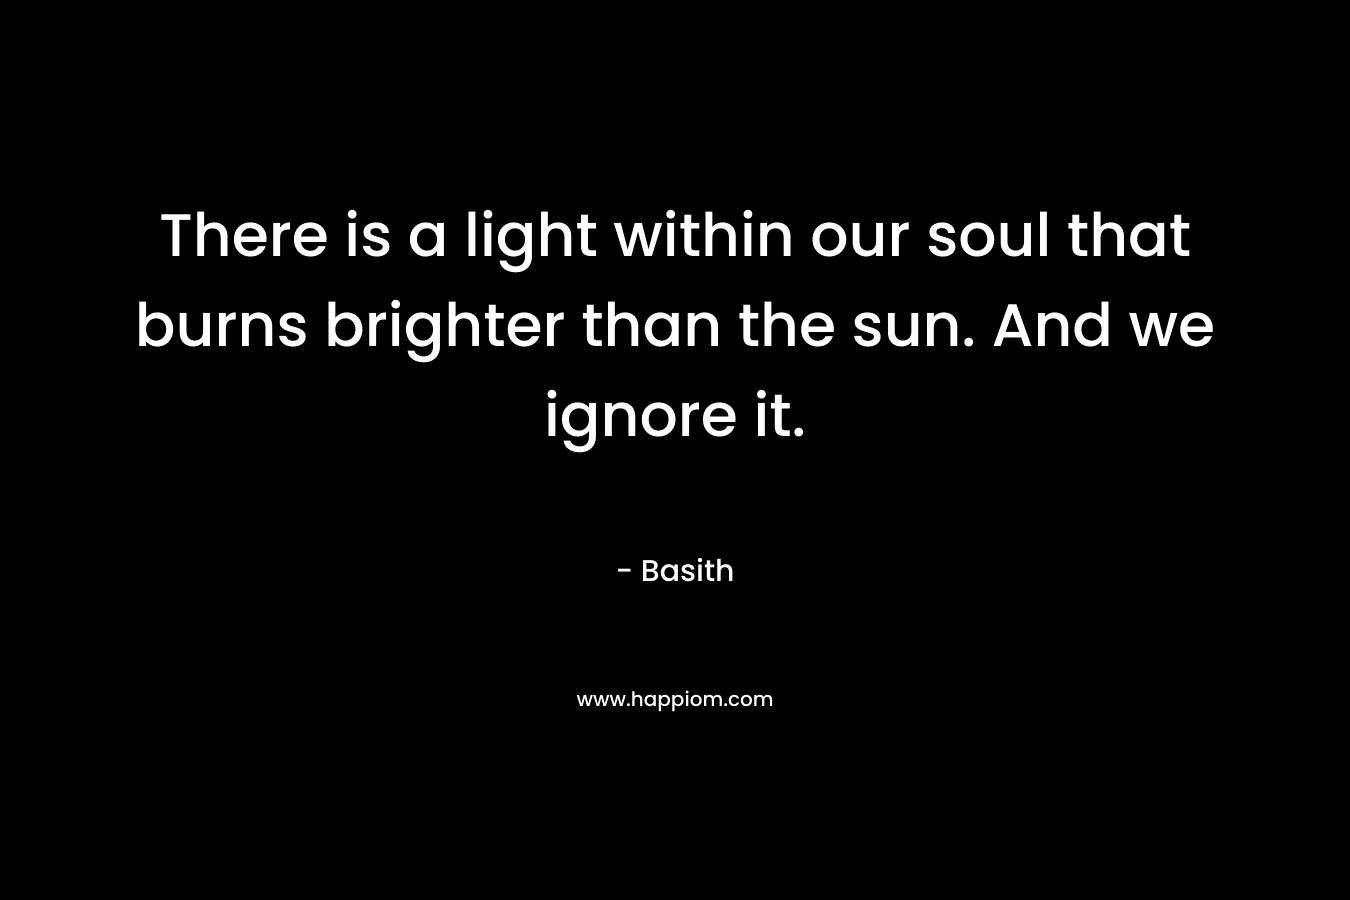 There is a light within our soul that burns brighter than the sun. And we ignore it. – Basith